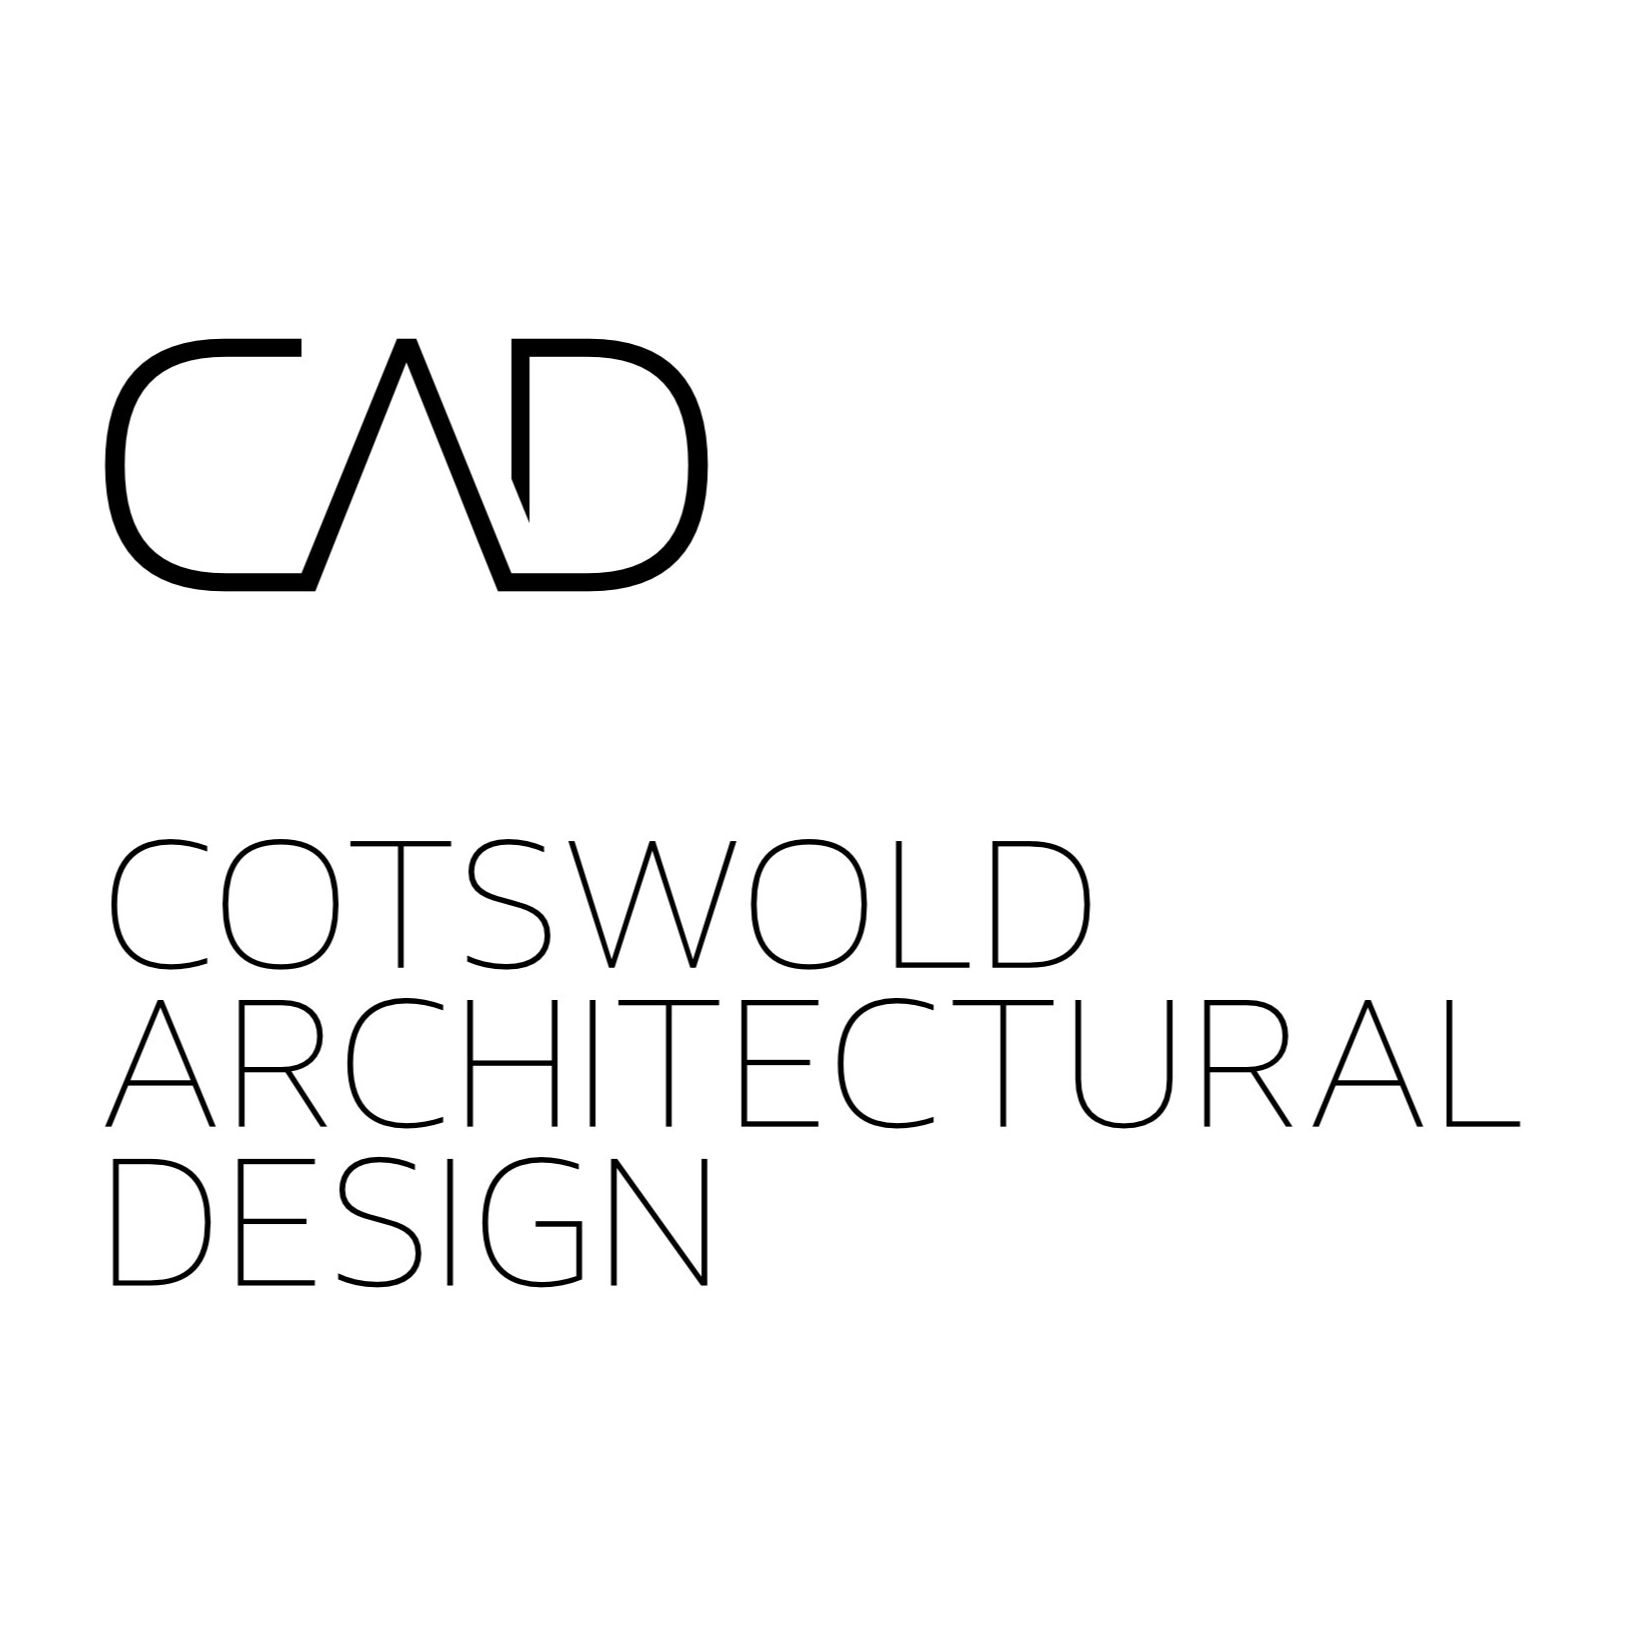 Logo of Cotswold Architectural Design Architectural Designer In Cirencester, Gloucestershire